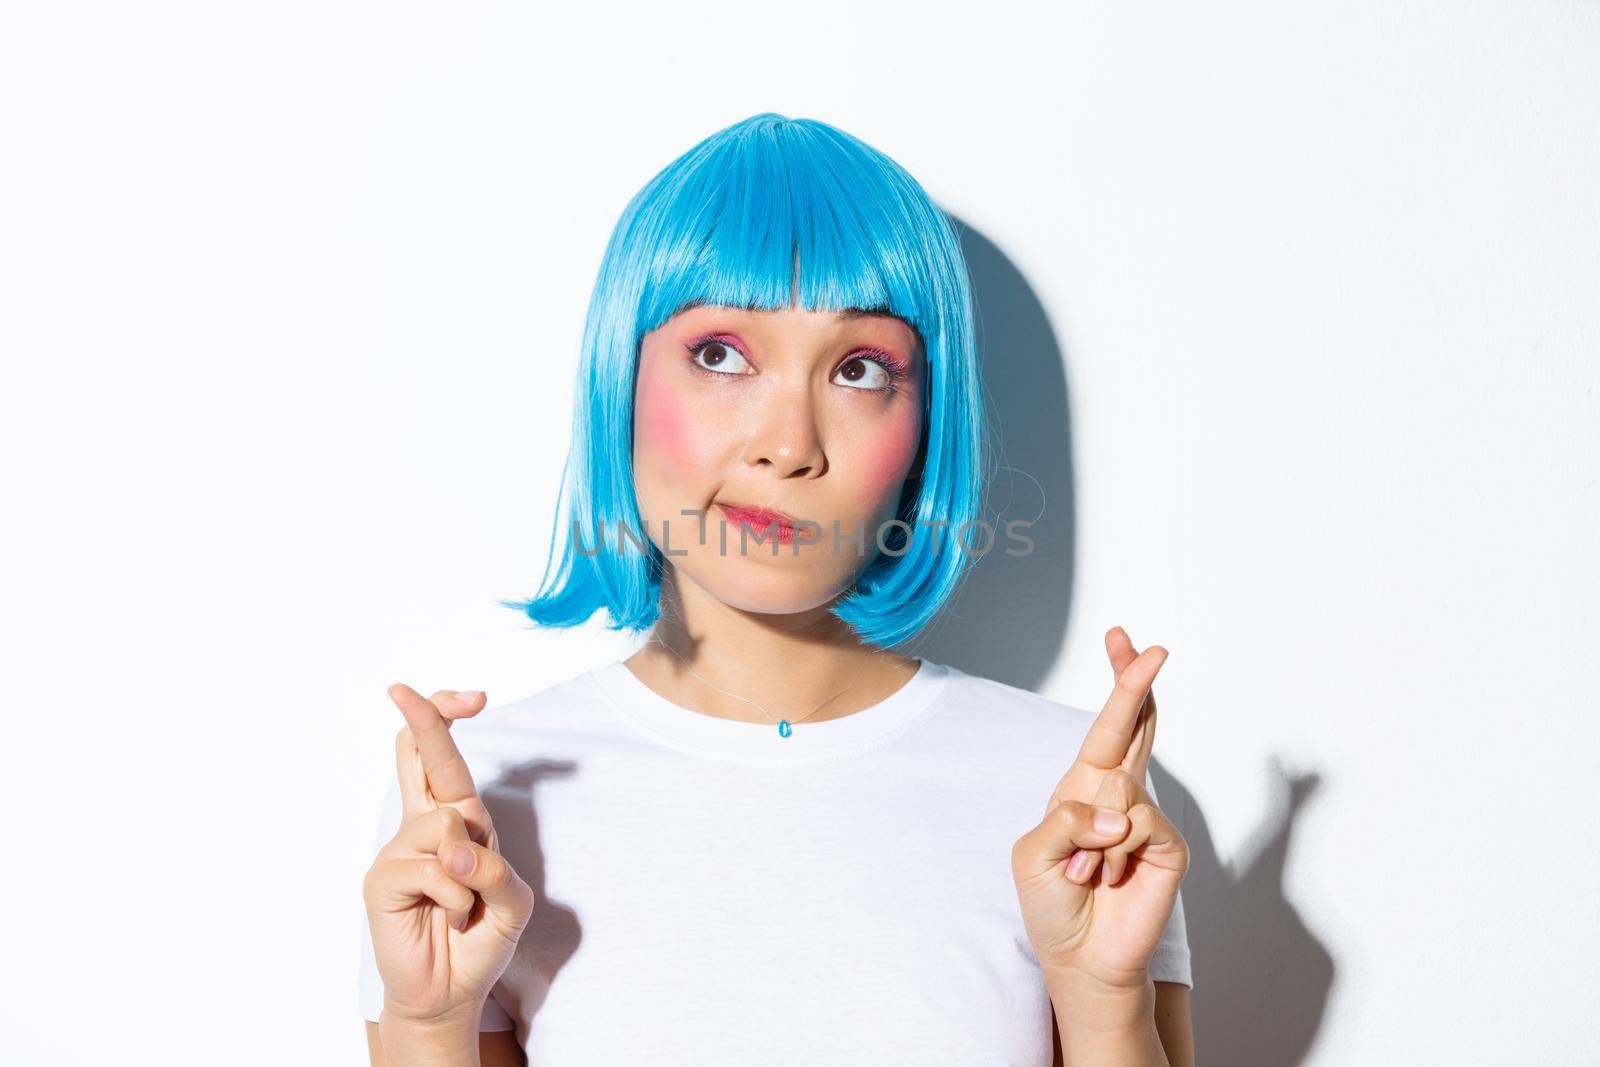 Hopeful beautiful asian girl in blue wig making wish, looking dreamy at upper left corner and cross fingers for good luck, standing over white background.